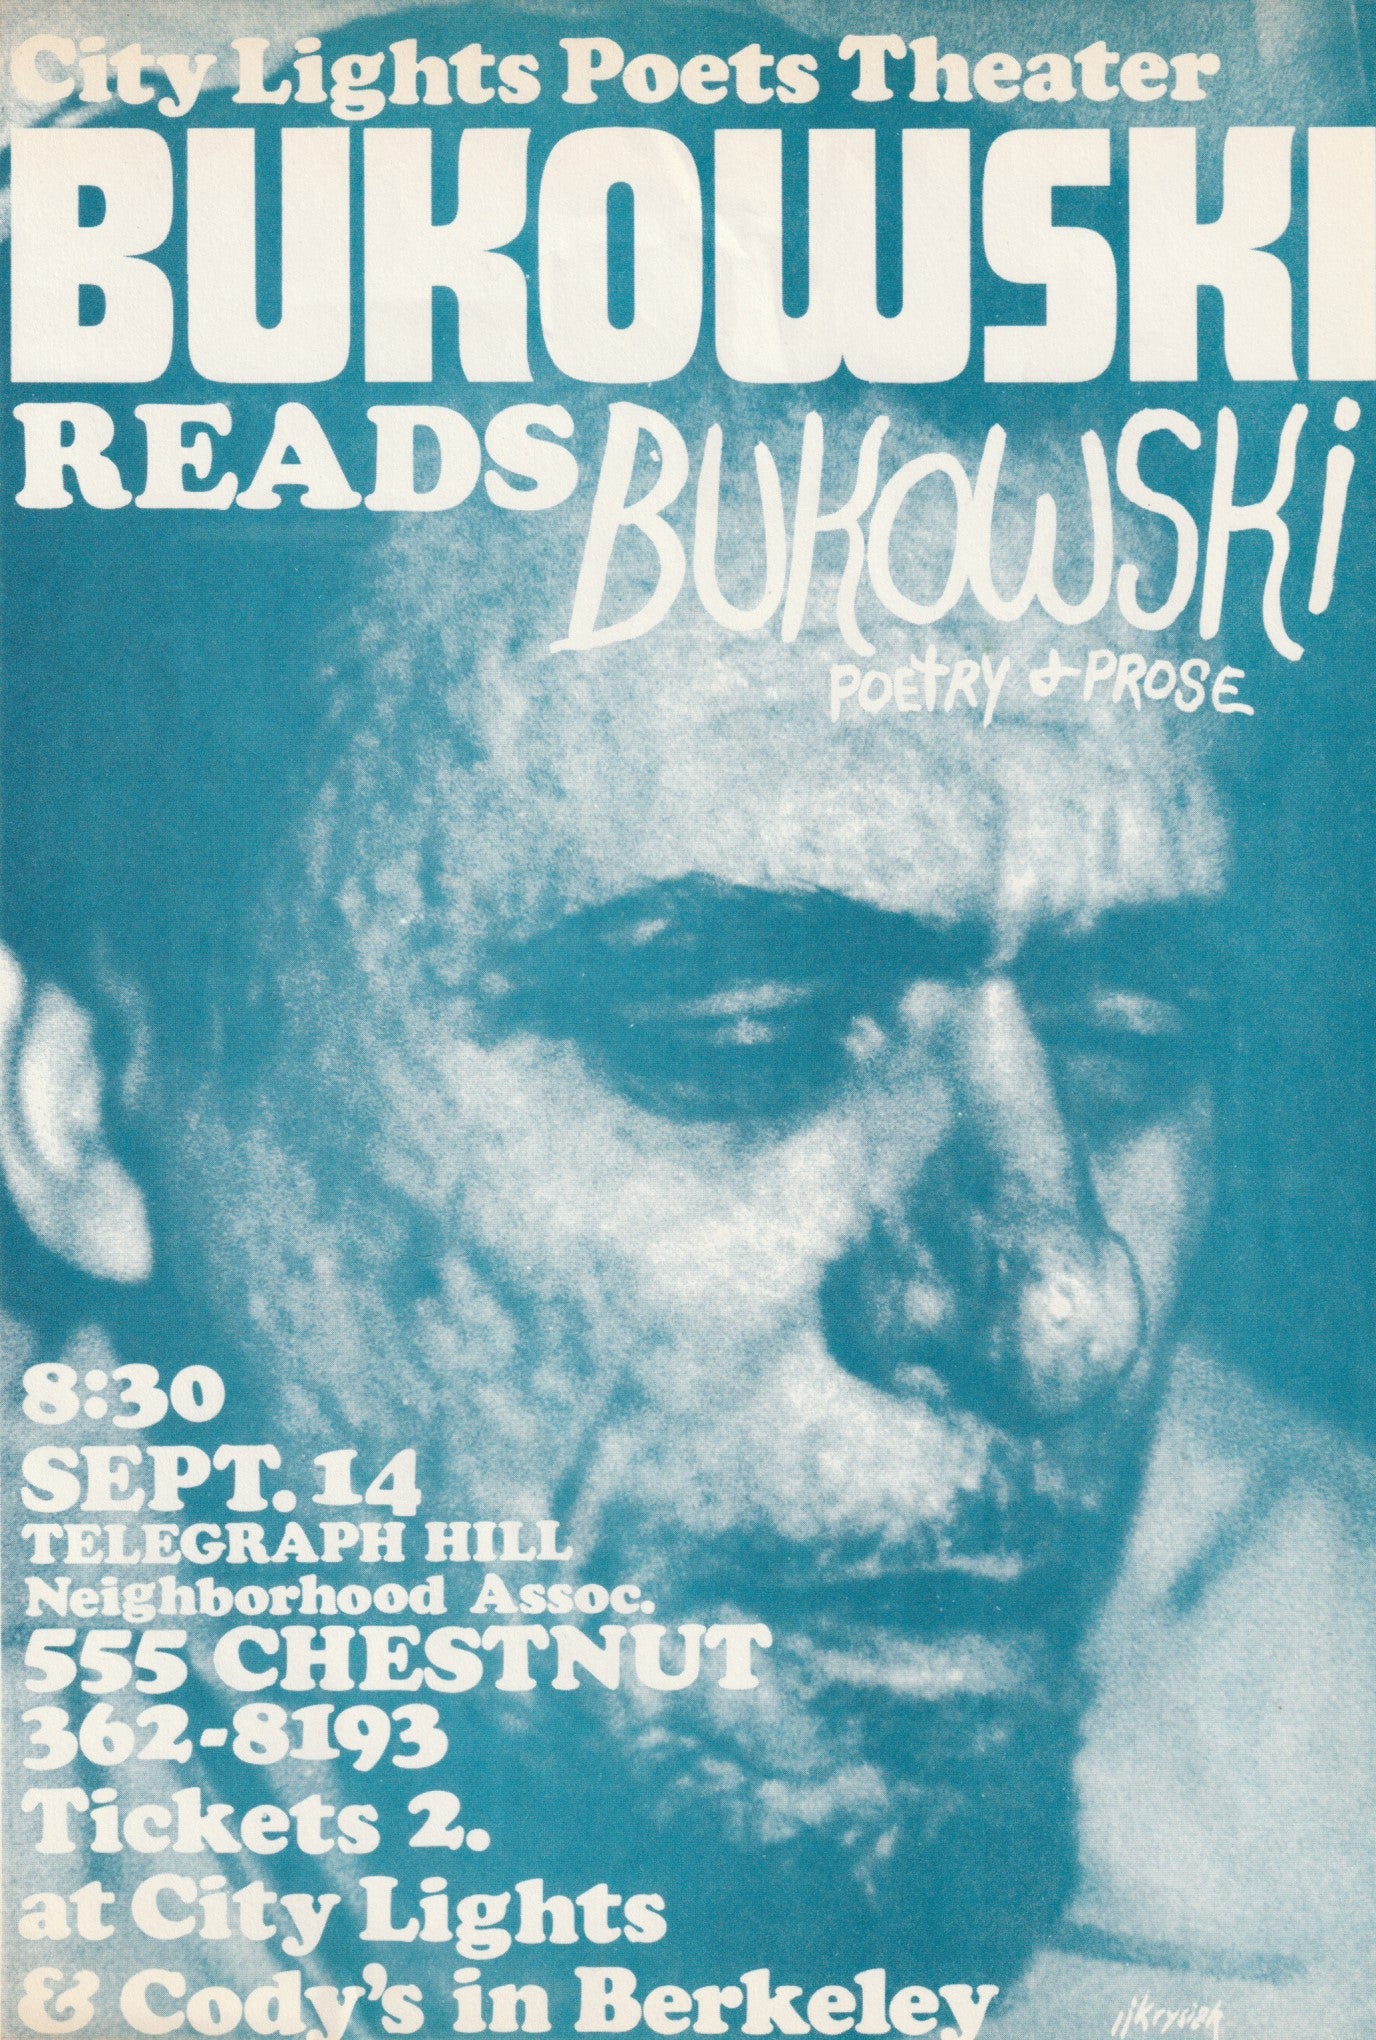 Flyer for 1973 Bukowski Reading at City Lights Poets Theater